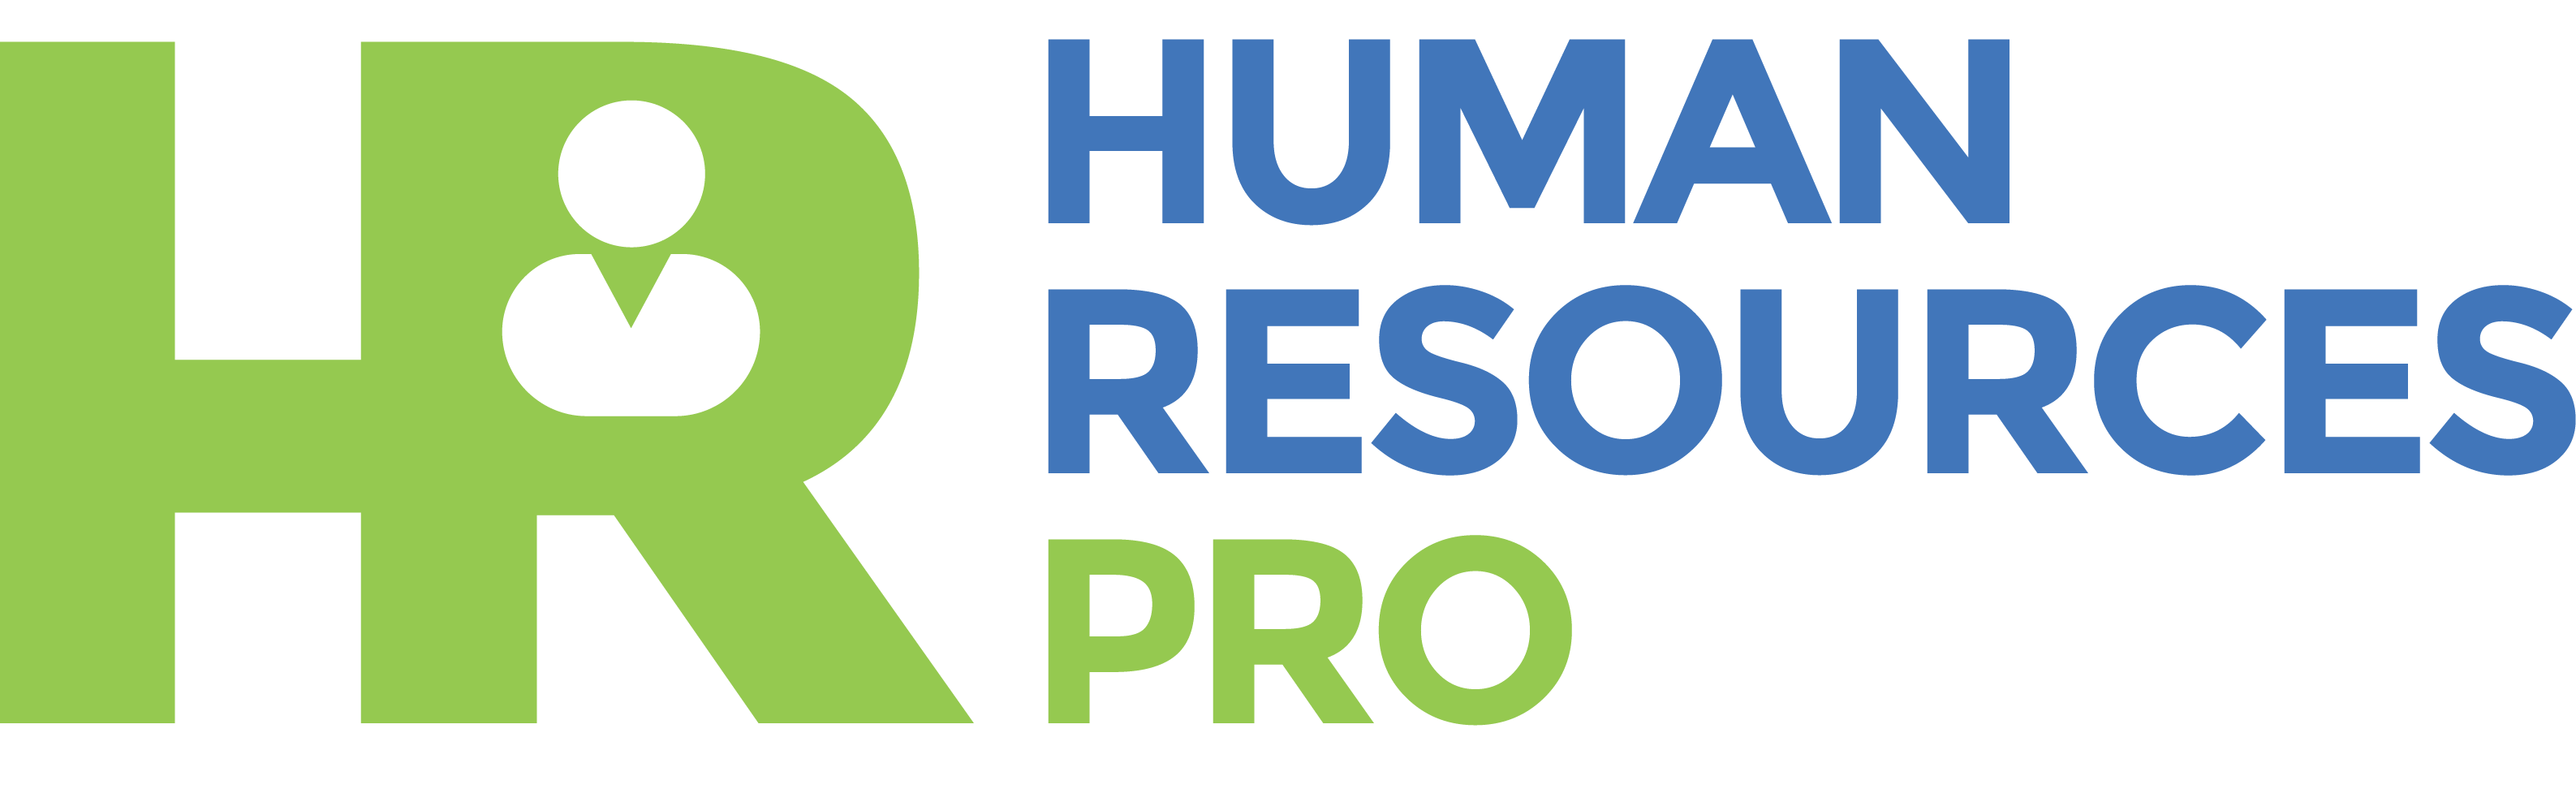 Independent HR Consulting Services | Human Resources Pro